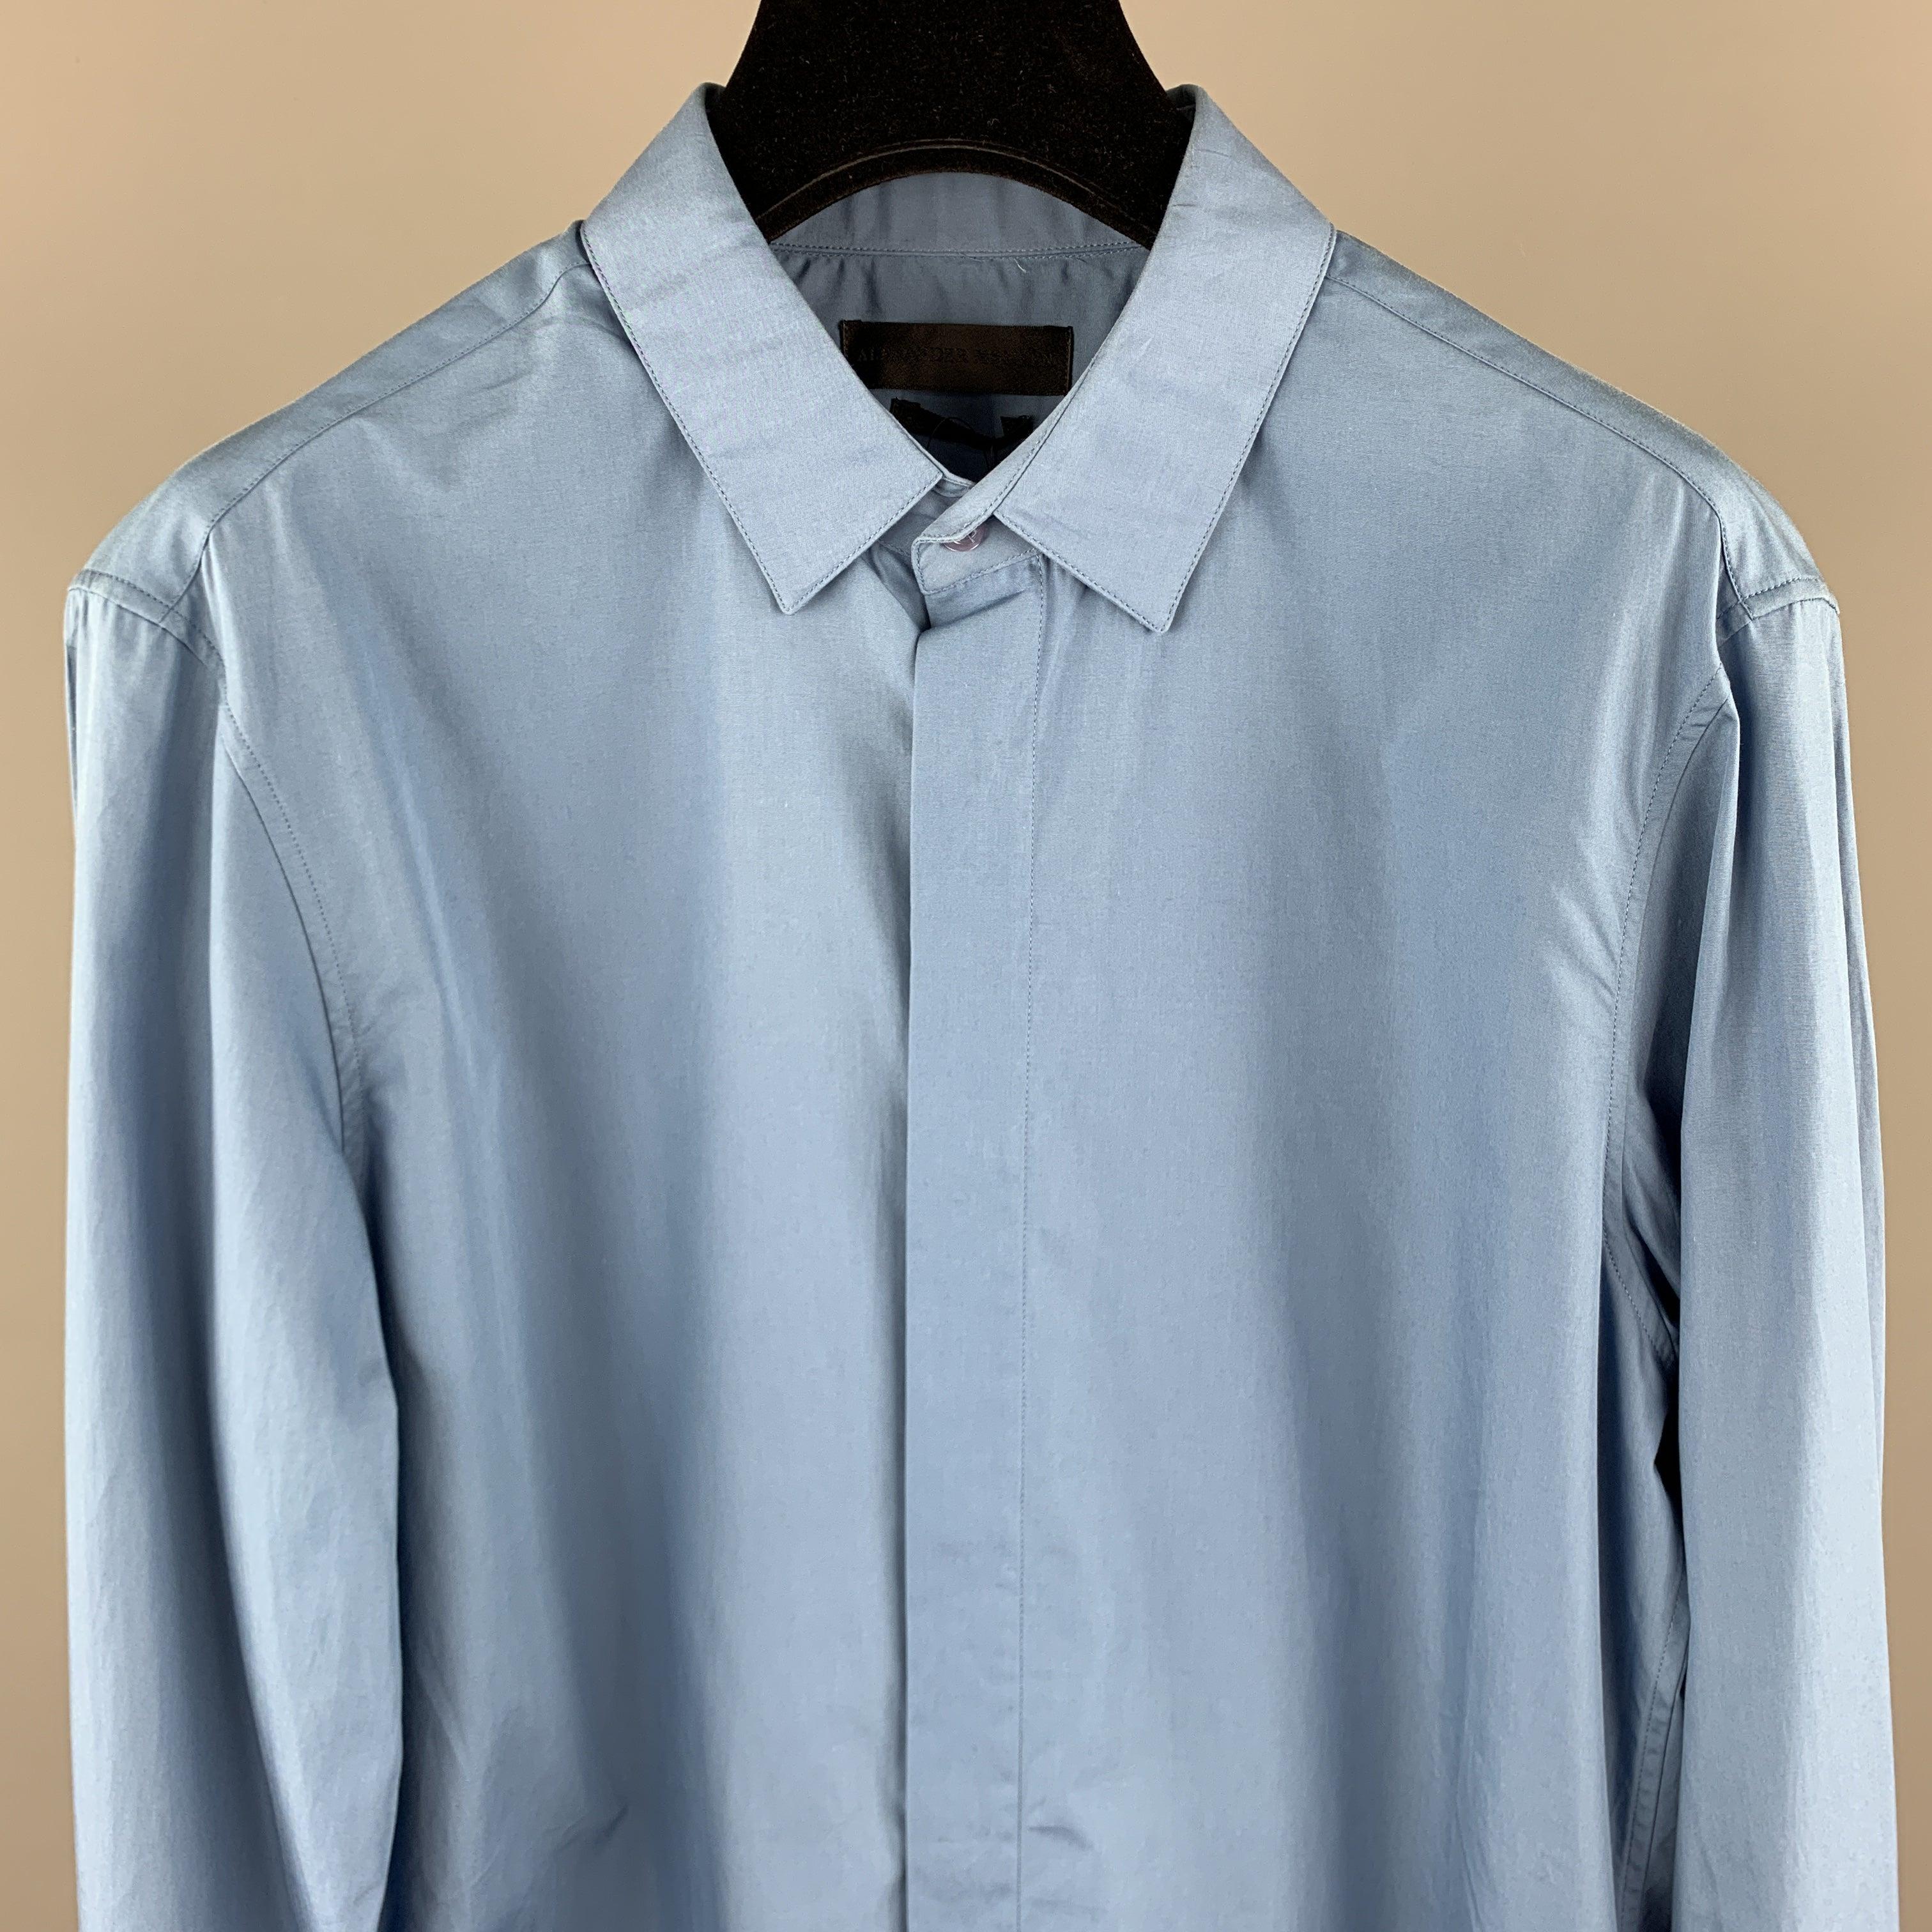 ALEXANDER MCQUEEN Long Sleeve Shirt comes in a blue cotton featuring a button up style with a hidden button closure. Made in Italy.
New With Tags.
 

Marked:   46 

Measurements: 
 
Shoulder: 15.5 inches 
Chest: 36 inches Sleeve: 27 inches 
Length: